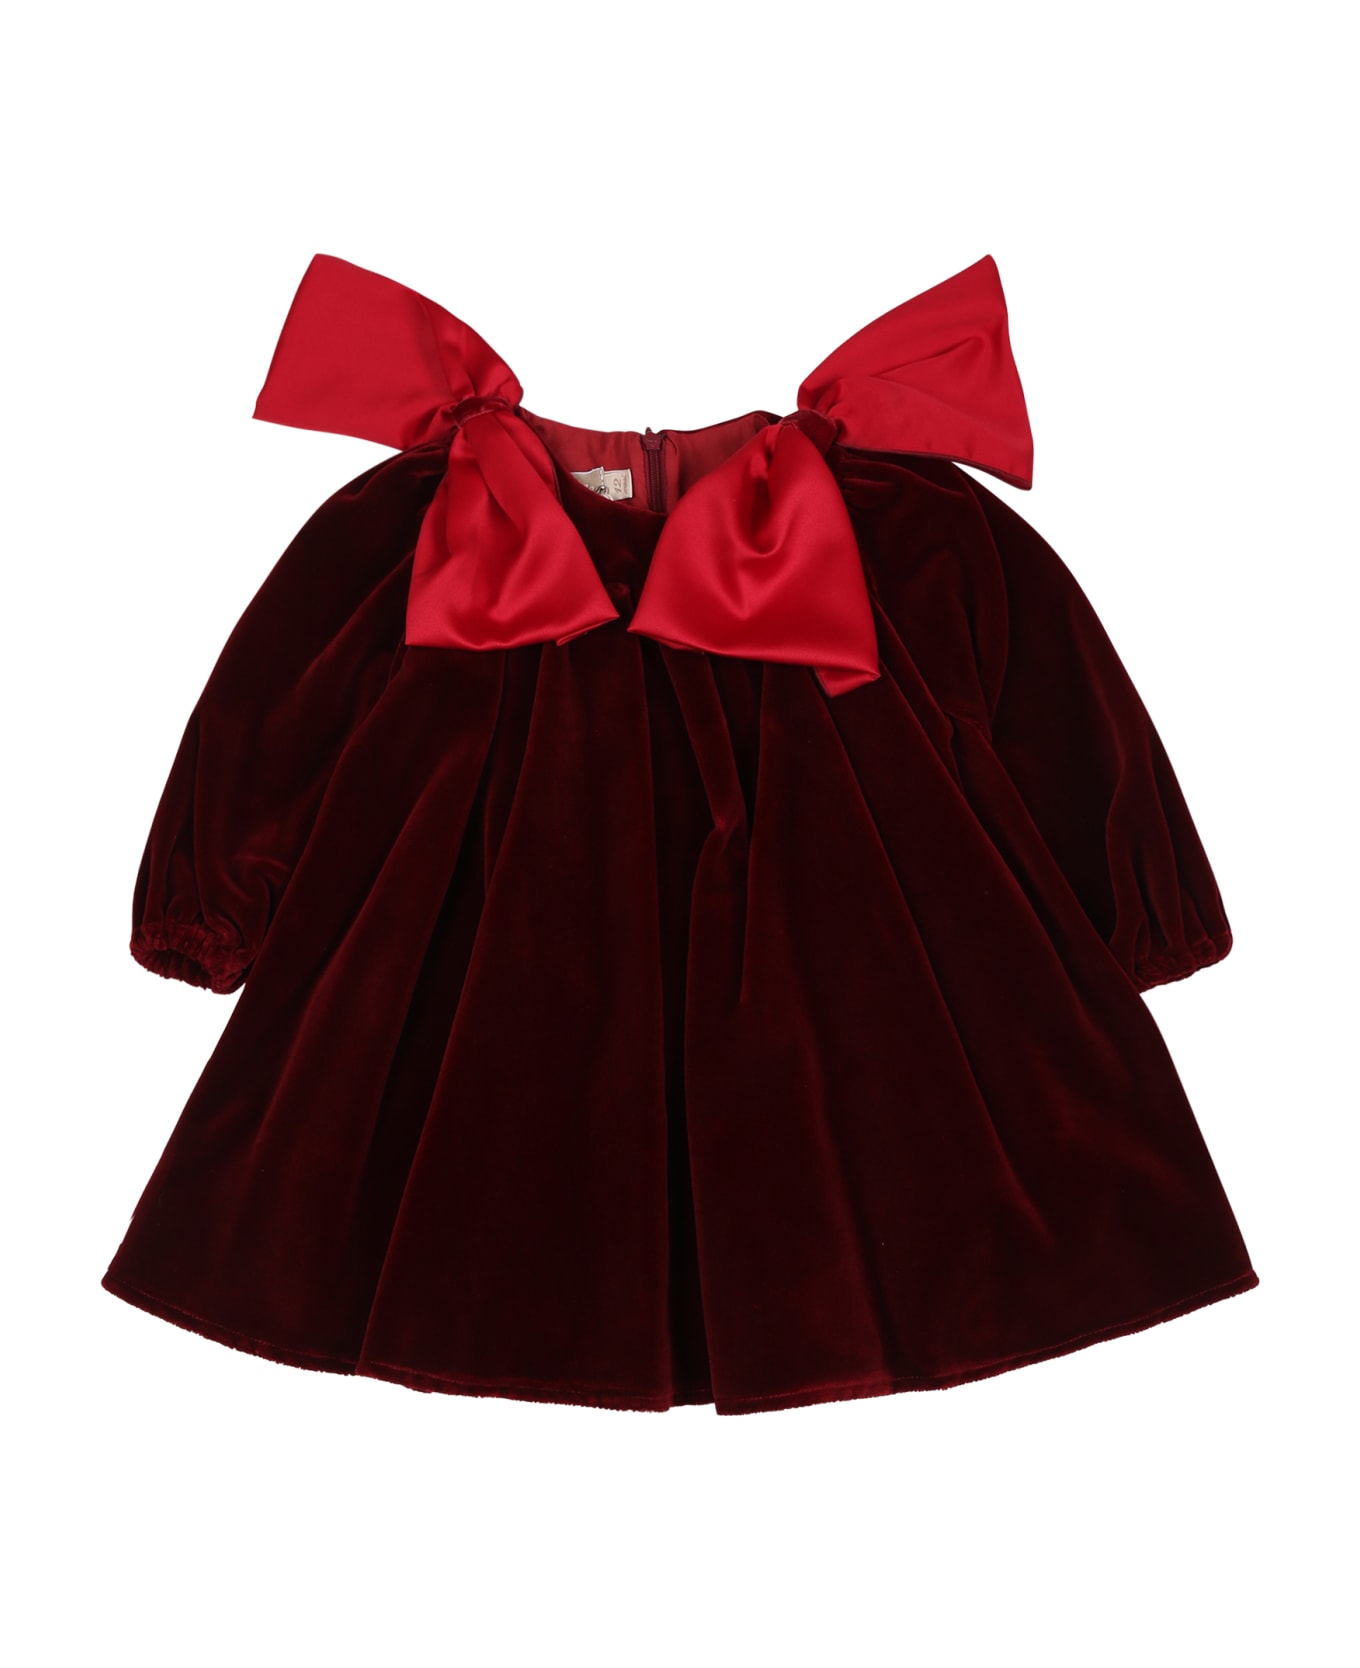 La stupenderia Burgundy Dress For Baby Girl With Bow - Bordeaux